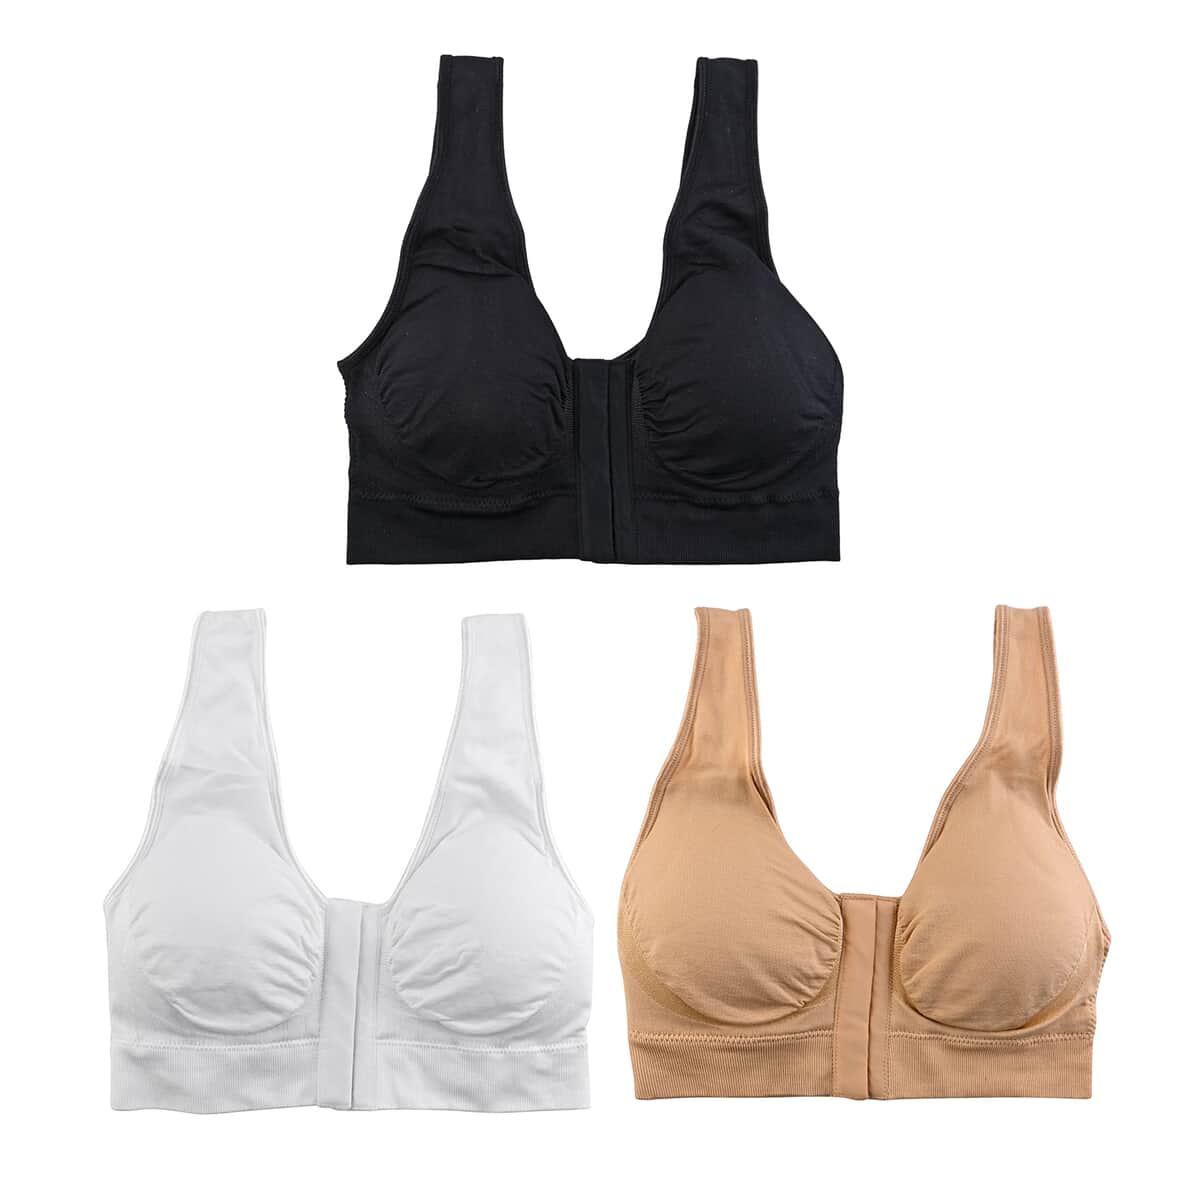 Miracle Bamboo Beyond Comfort Bra Set of 3 Front Closure Bras - Black, Beige and White - Size M image number 0